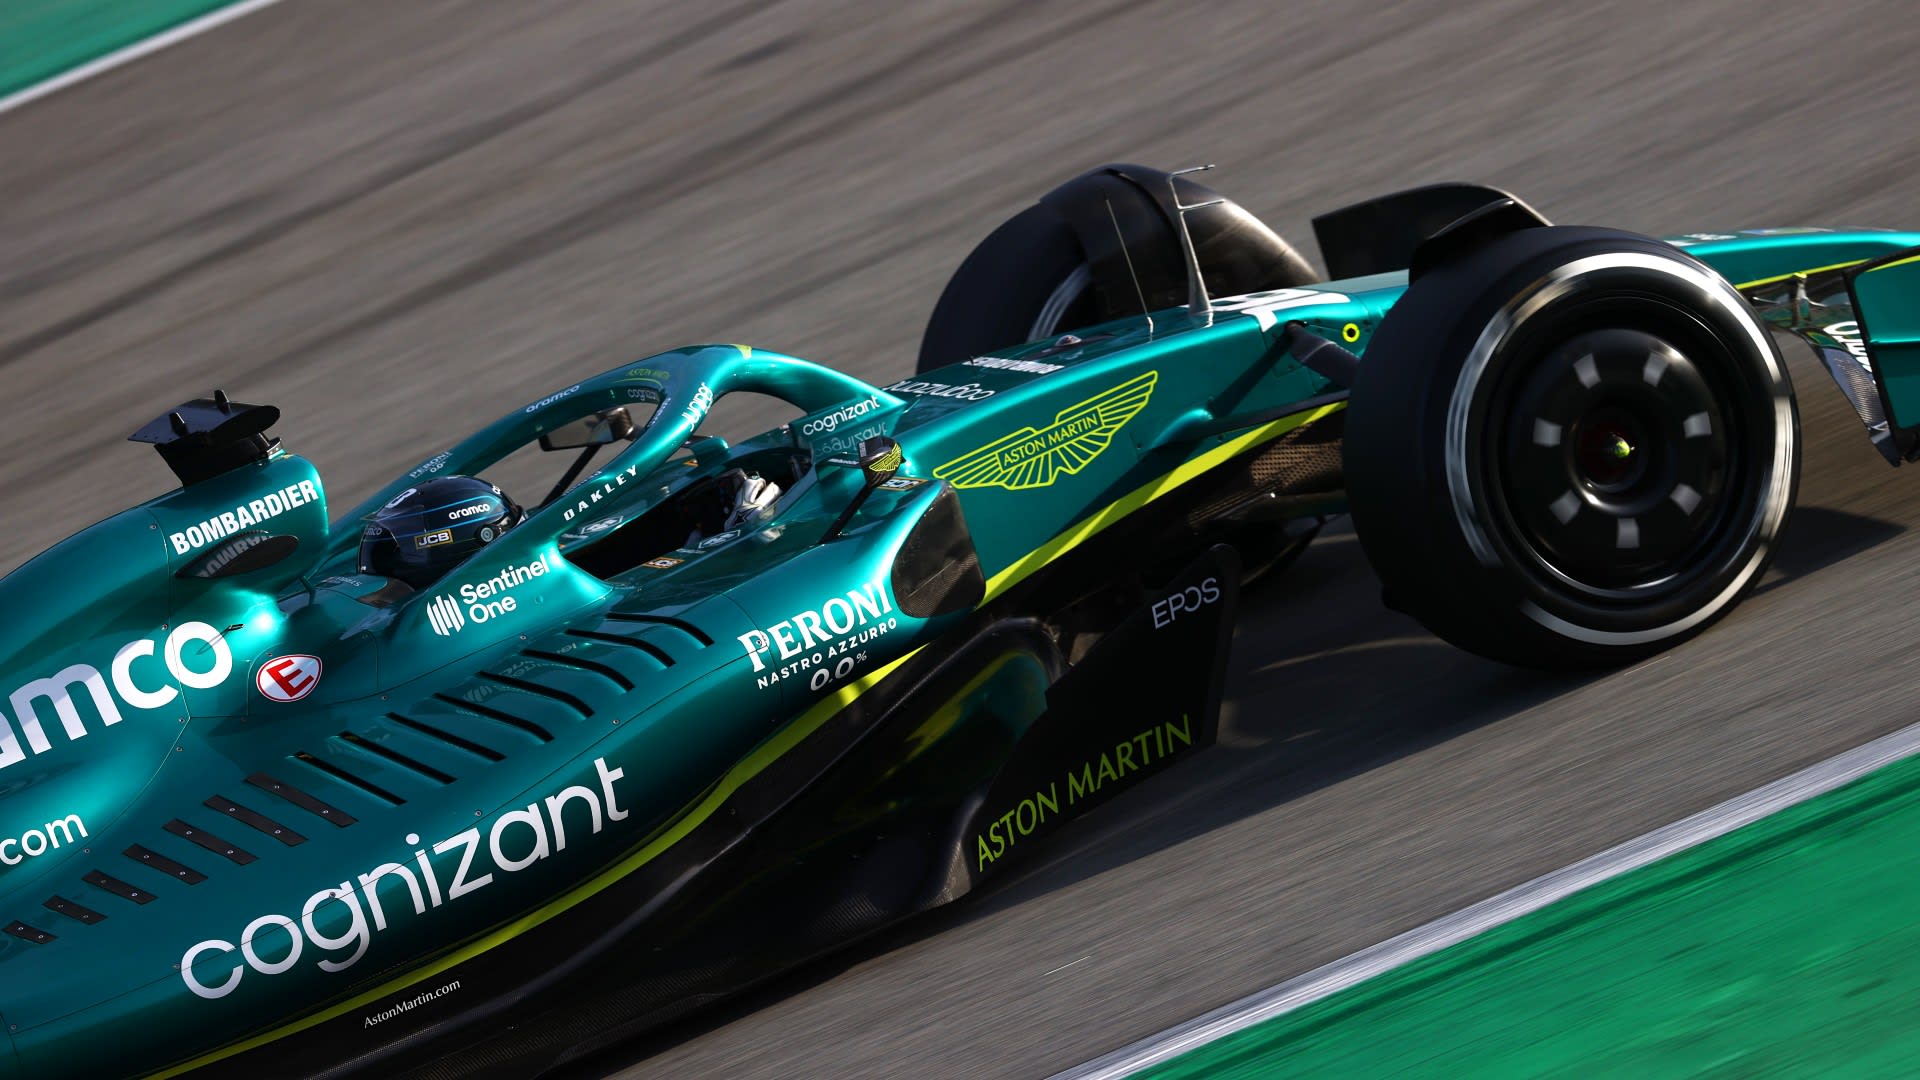 Aston Martin's explanation for developing two F1 cars at once - The Race